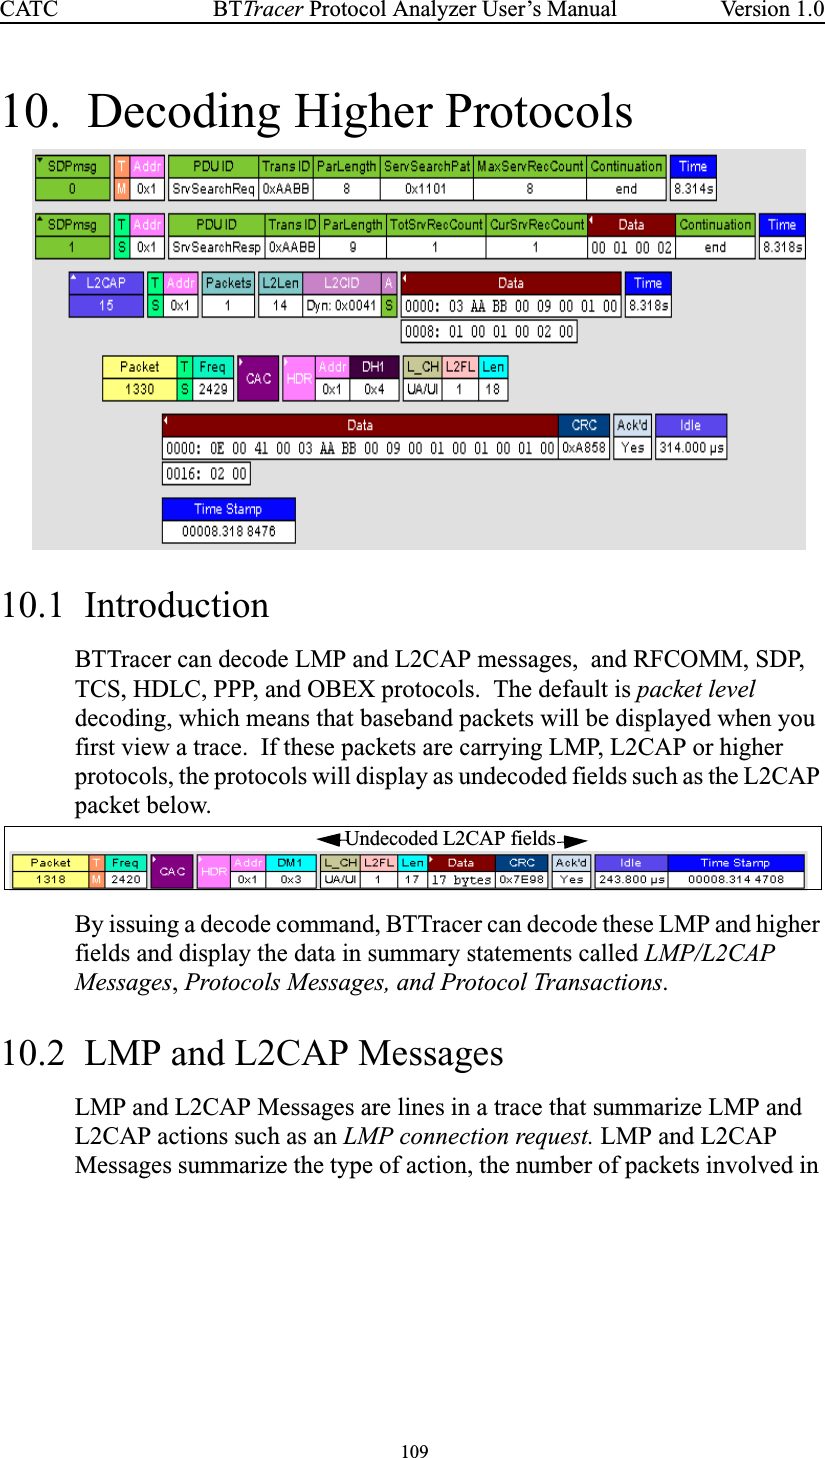 109BTTracer Protocol Analyzer User’s ManualCATC Version 1.010. Decoding Higher Protocols10.1 IntroductionBTTracer can decode LMP and L2CAP messages, and RFCOMM, SDP,TCS, HDLC, PPP, and OBEX protocols. The default is packet leveldecoding, which means that baseband packets will be displayed when youfirst view a trace. If these packets are carrying LMP, L2CAP or higherprotocols, the protocols will display as undecoded fields such as the L2CAPpacket below.By issuing a decode command, BTTracer can decode these LMP and higherfields and display the data in summary statements called LMP/L2CAPMessages,Protocols Messages, and Protocol Transactions.10.2 LMP and L2CAP MessagesLMP and L2CAP Messages are lines in a trace that summarize LMP andL2CAP actions such as an LMP connection request. LMP and L2CAPMessages summarize the type of action, the number of packets involved inUndecoded L2CAP fields